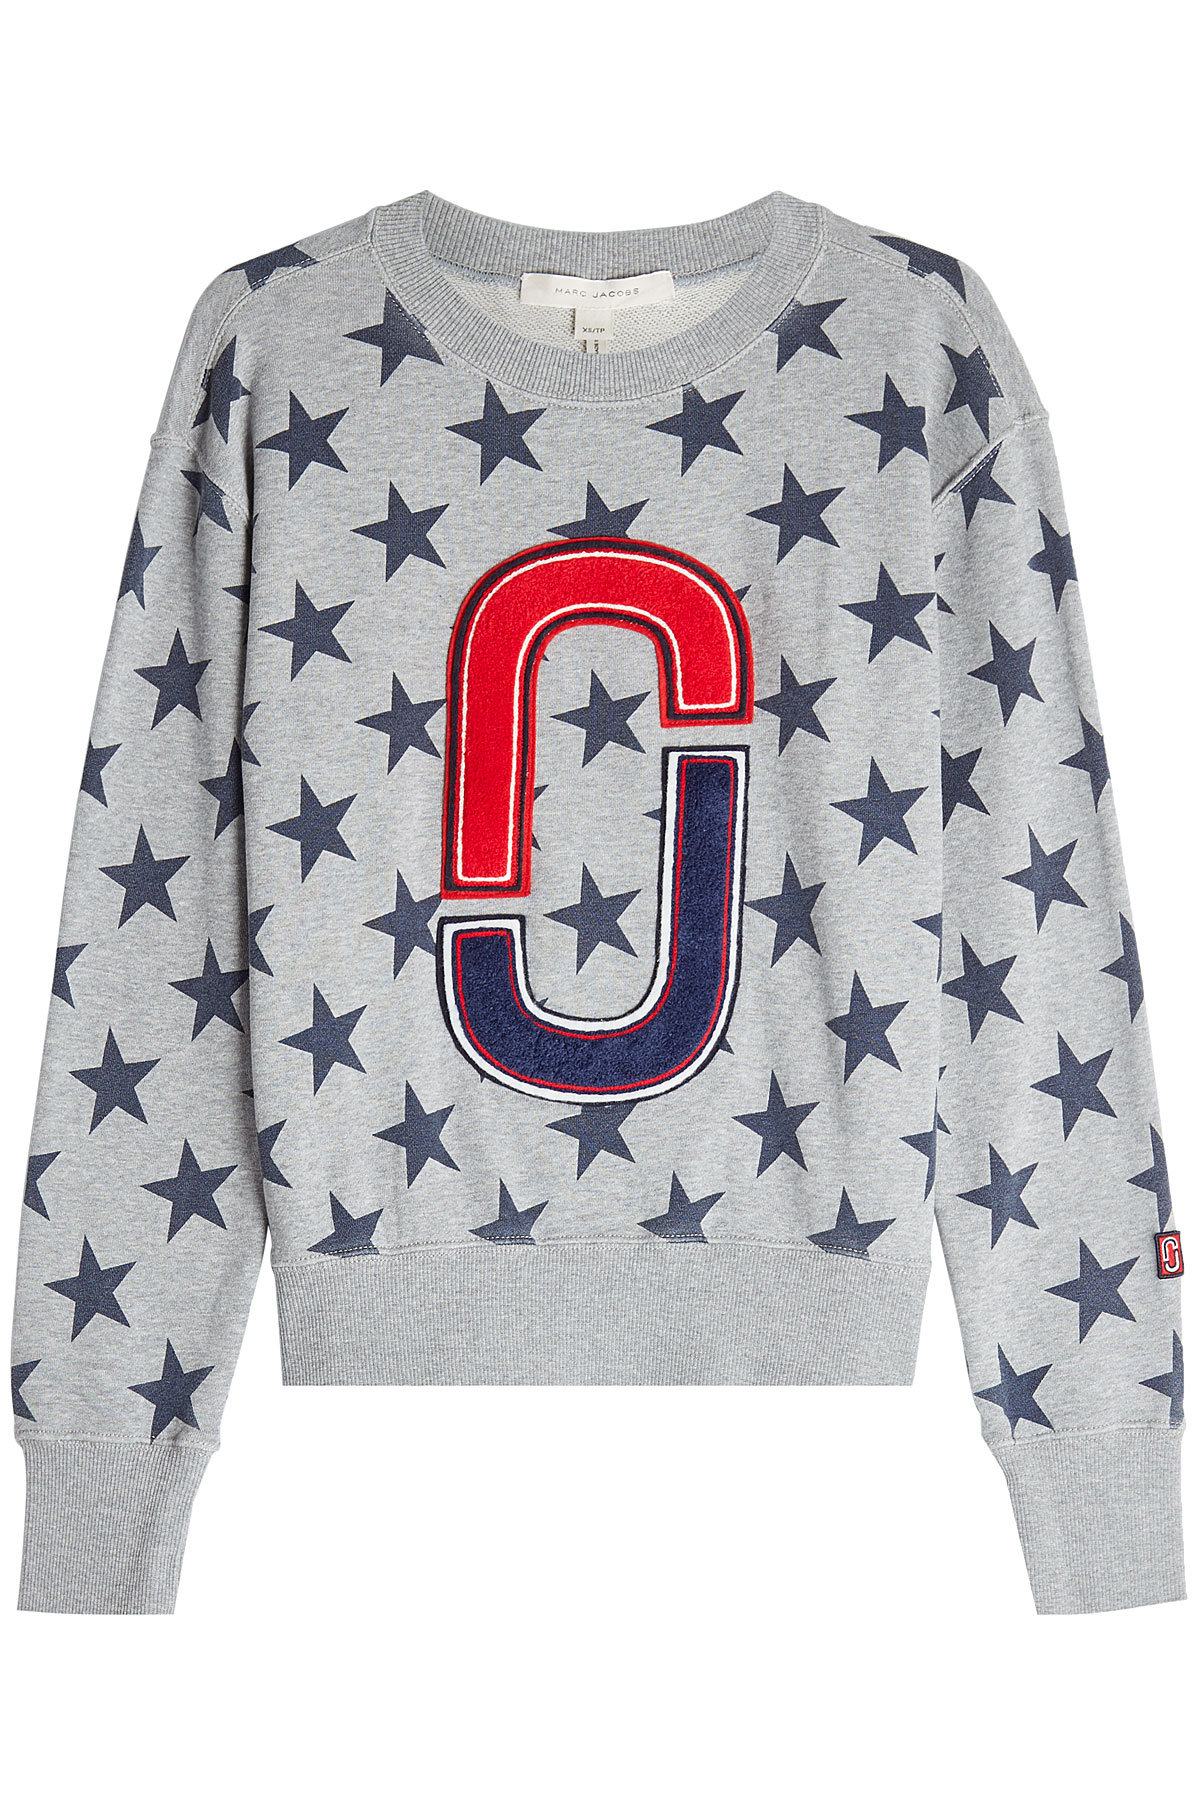 Printed Cotton Sweatshirt with Appliqué by Marc Jacobs